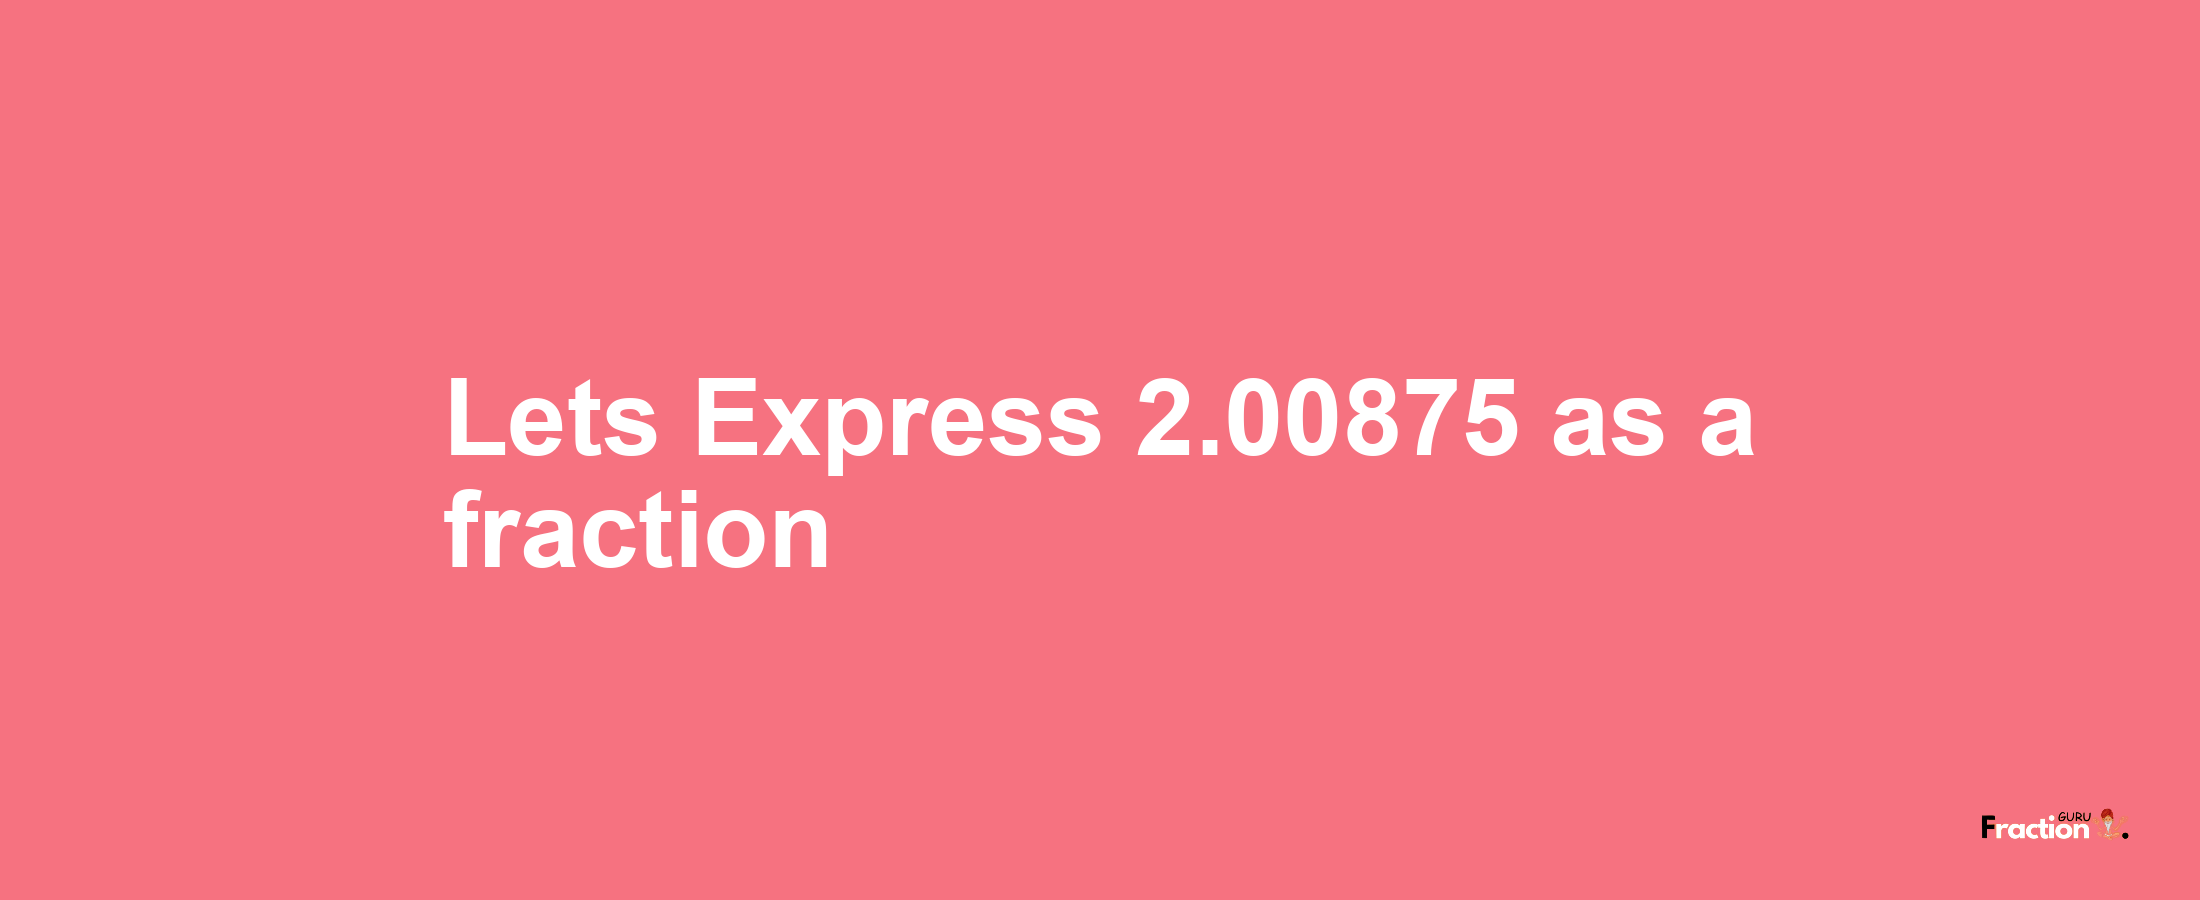 Lets Express 2.00875 as afraction